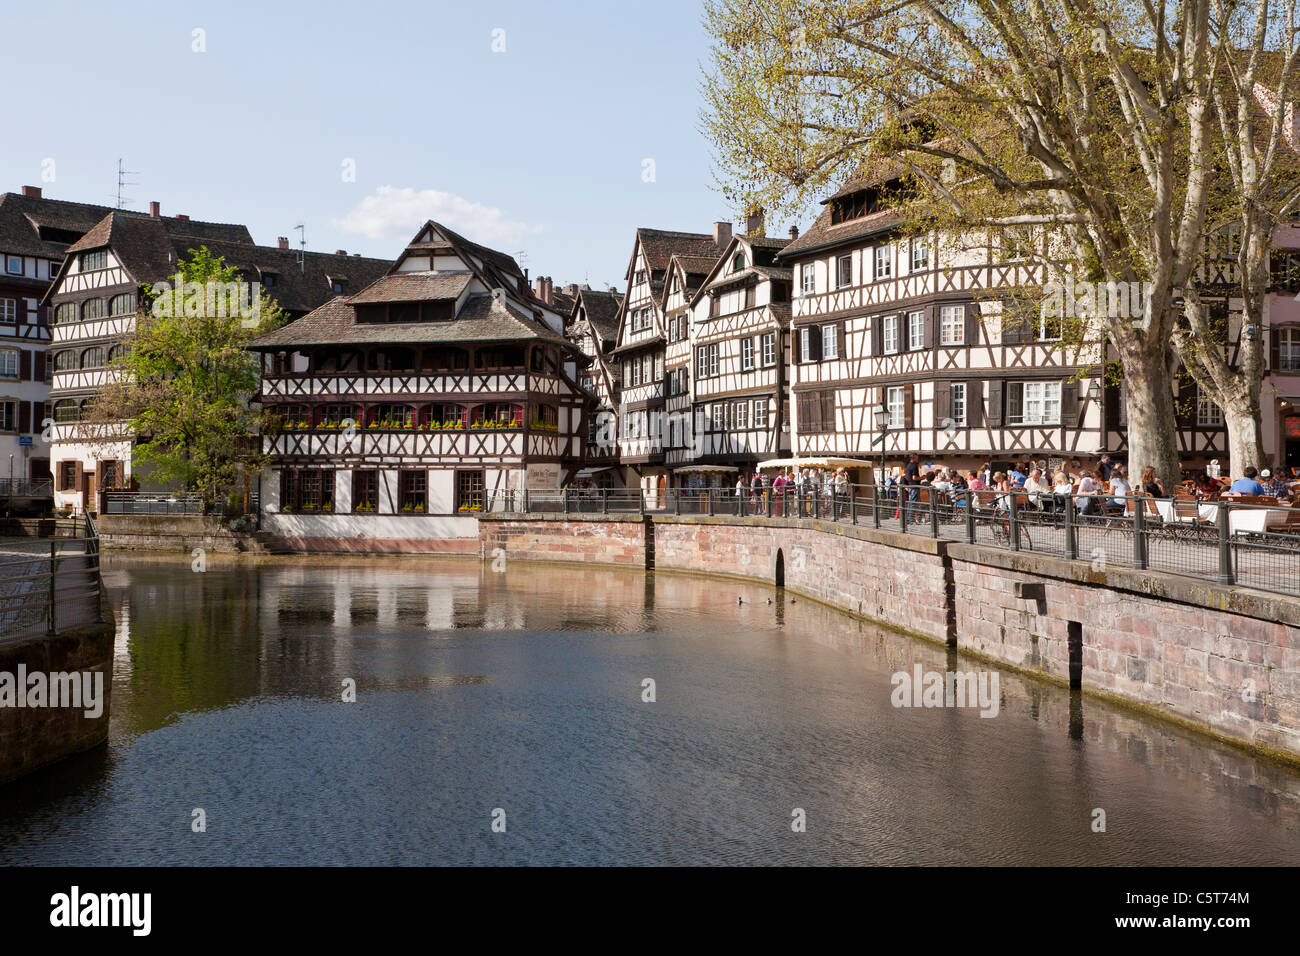 France, Alsace, Strasbourg, Petite-France, Place Benjamin Zix, View of frame houses near L'ill river Stock Photo